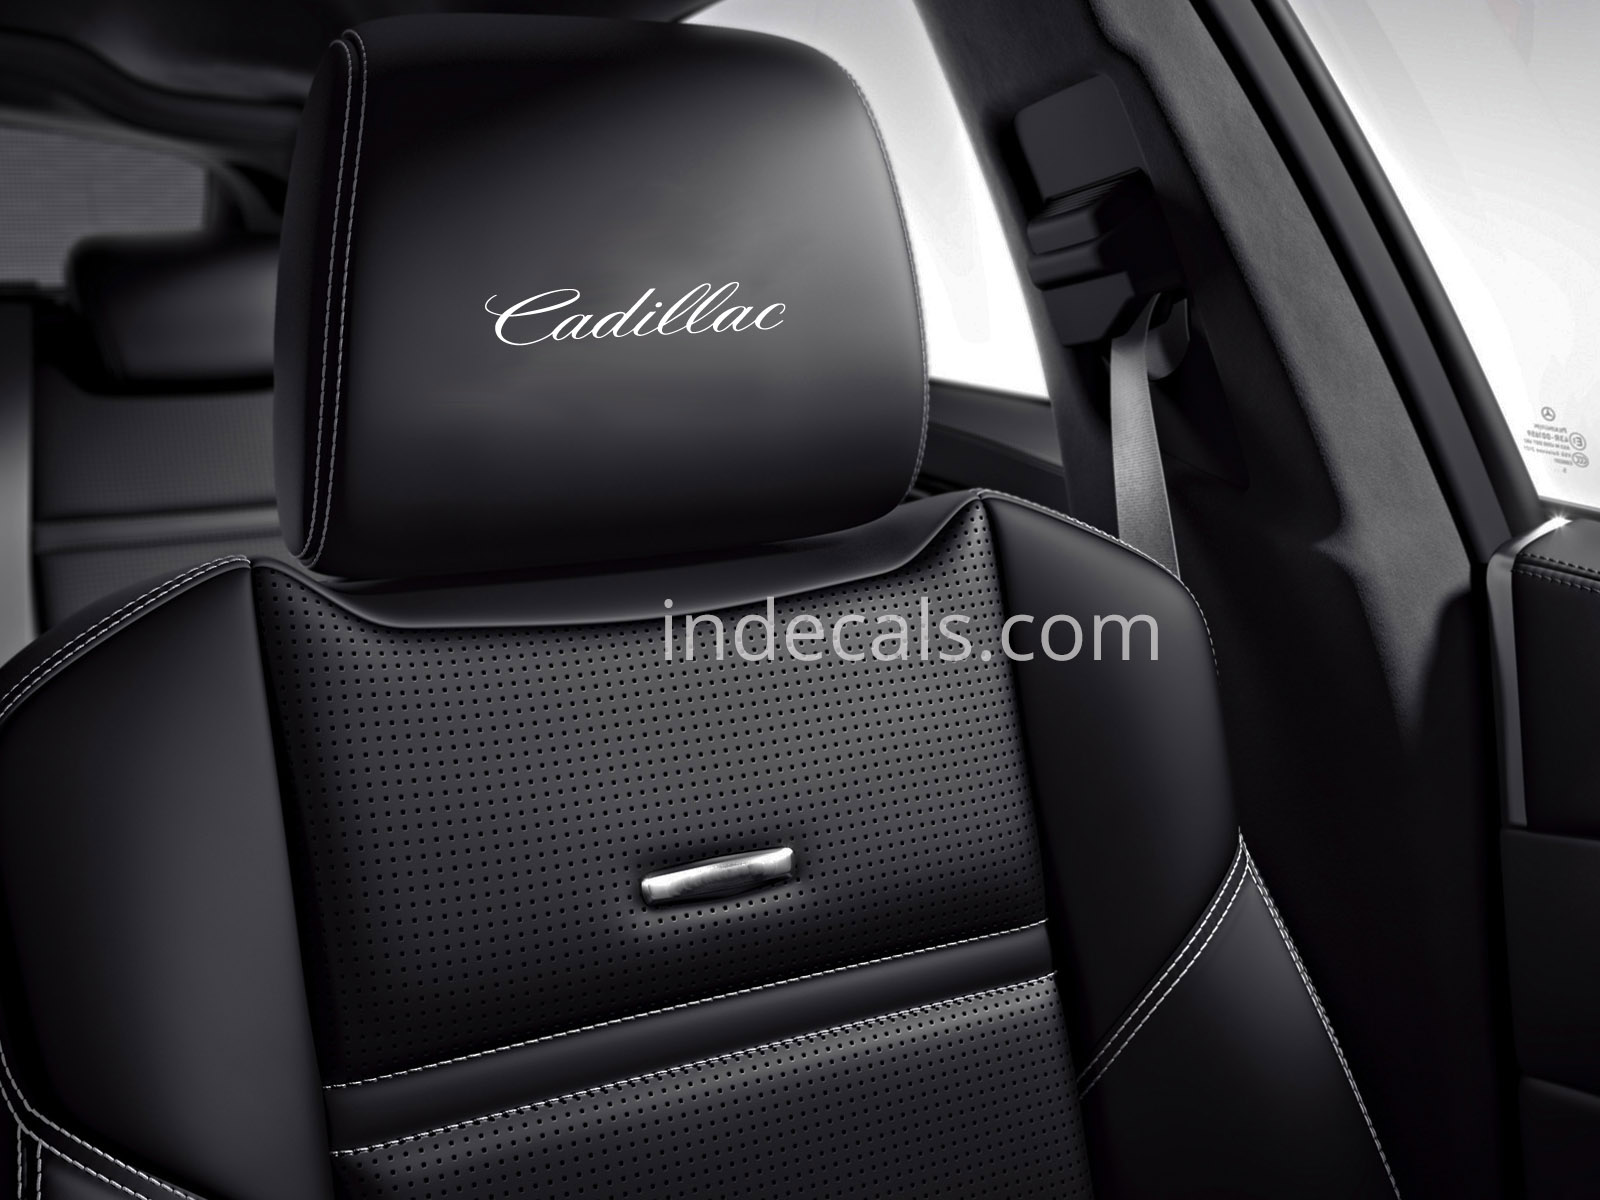 6 x Cadillac Stickers for Headrests - White